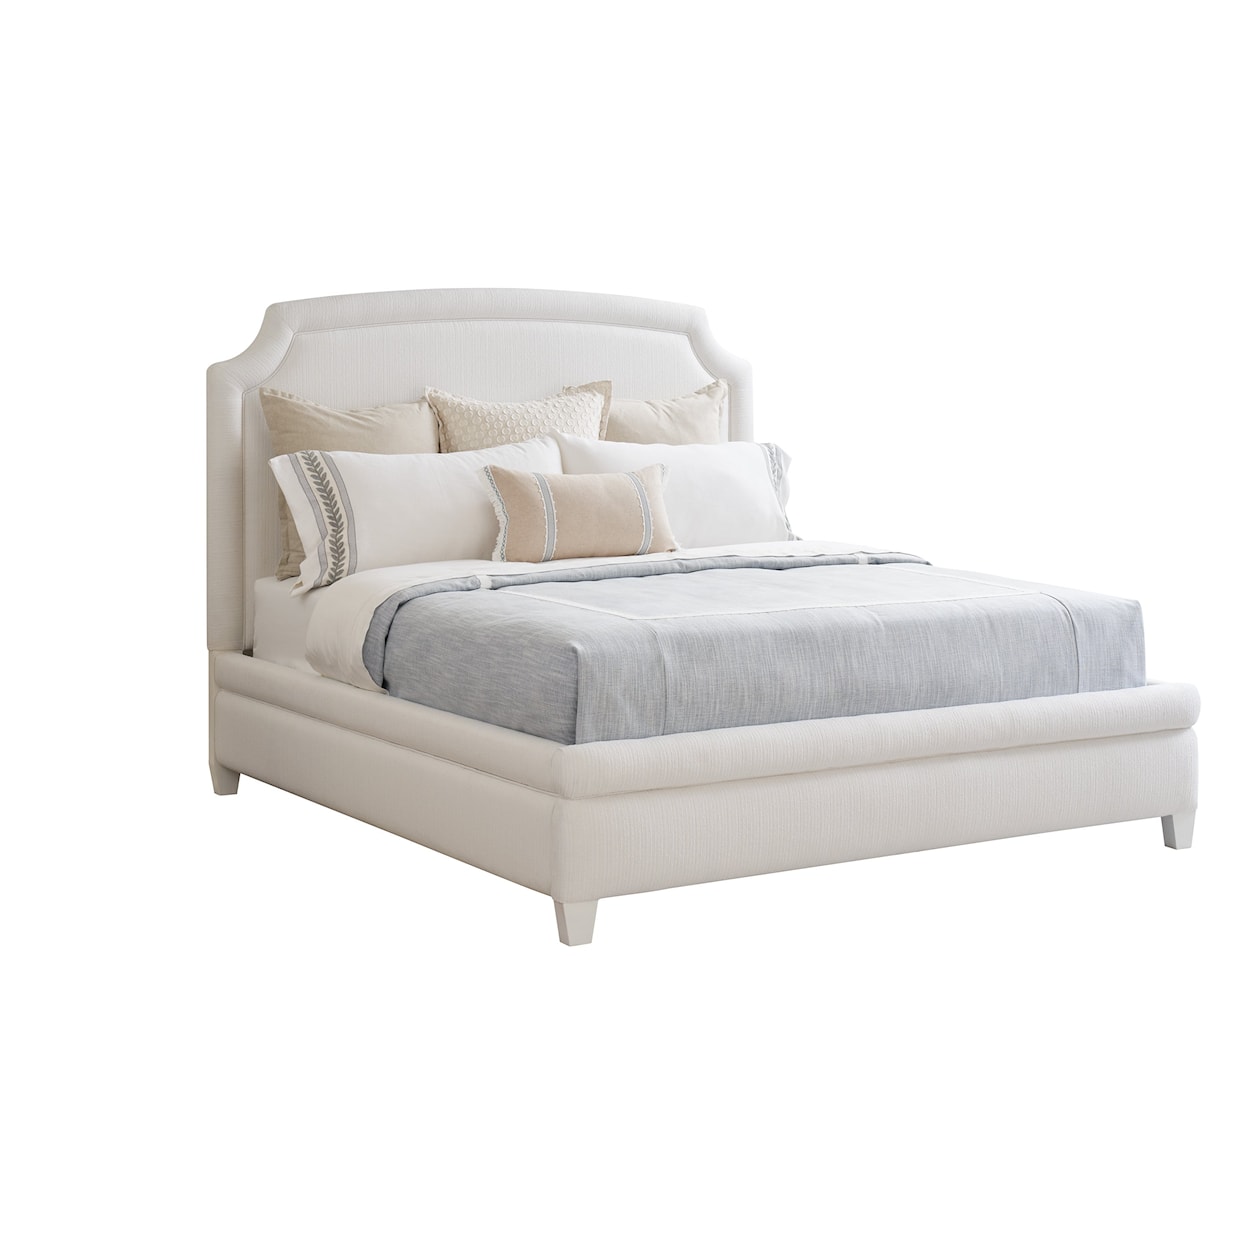 Barclay Butera Laguna Avalon Queen Upholstered Bed